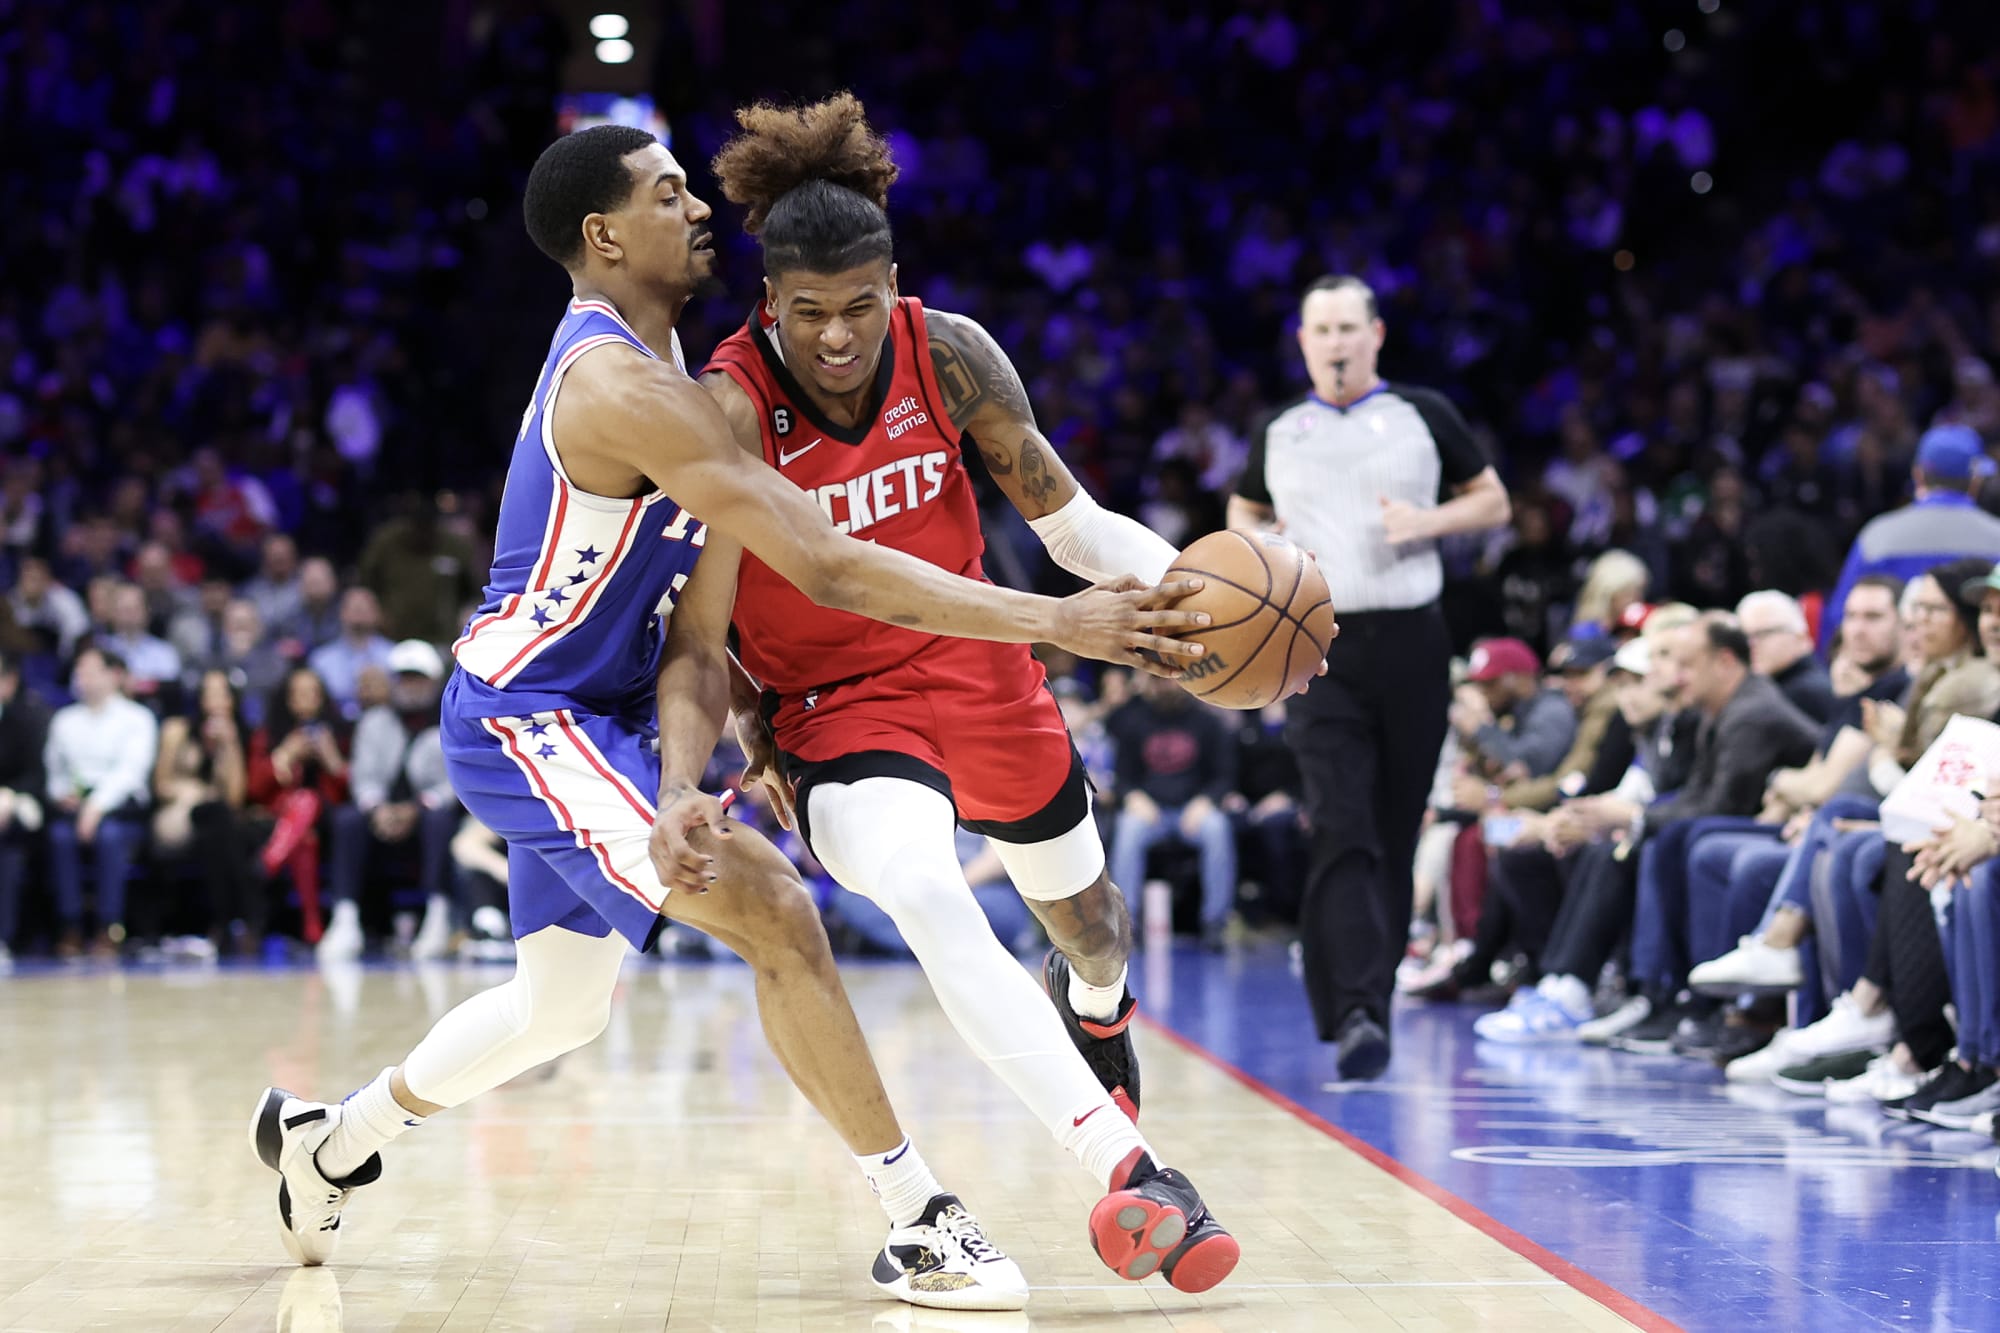 De'Anthony Melton weighs in on Sixers' recent defensive struggles